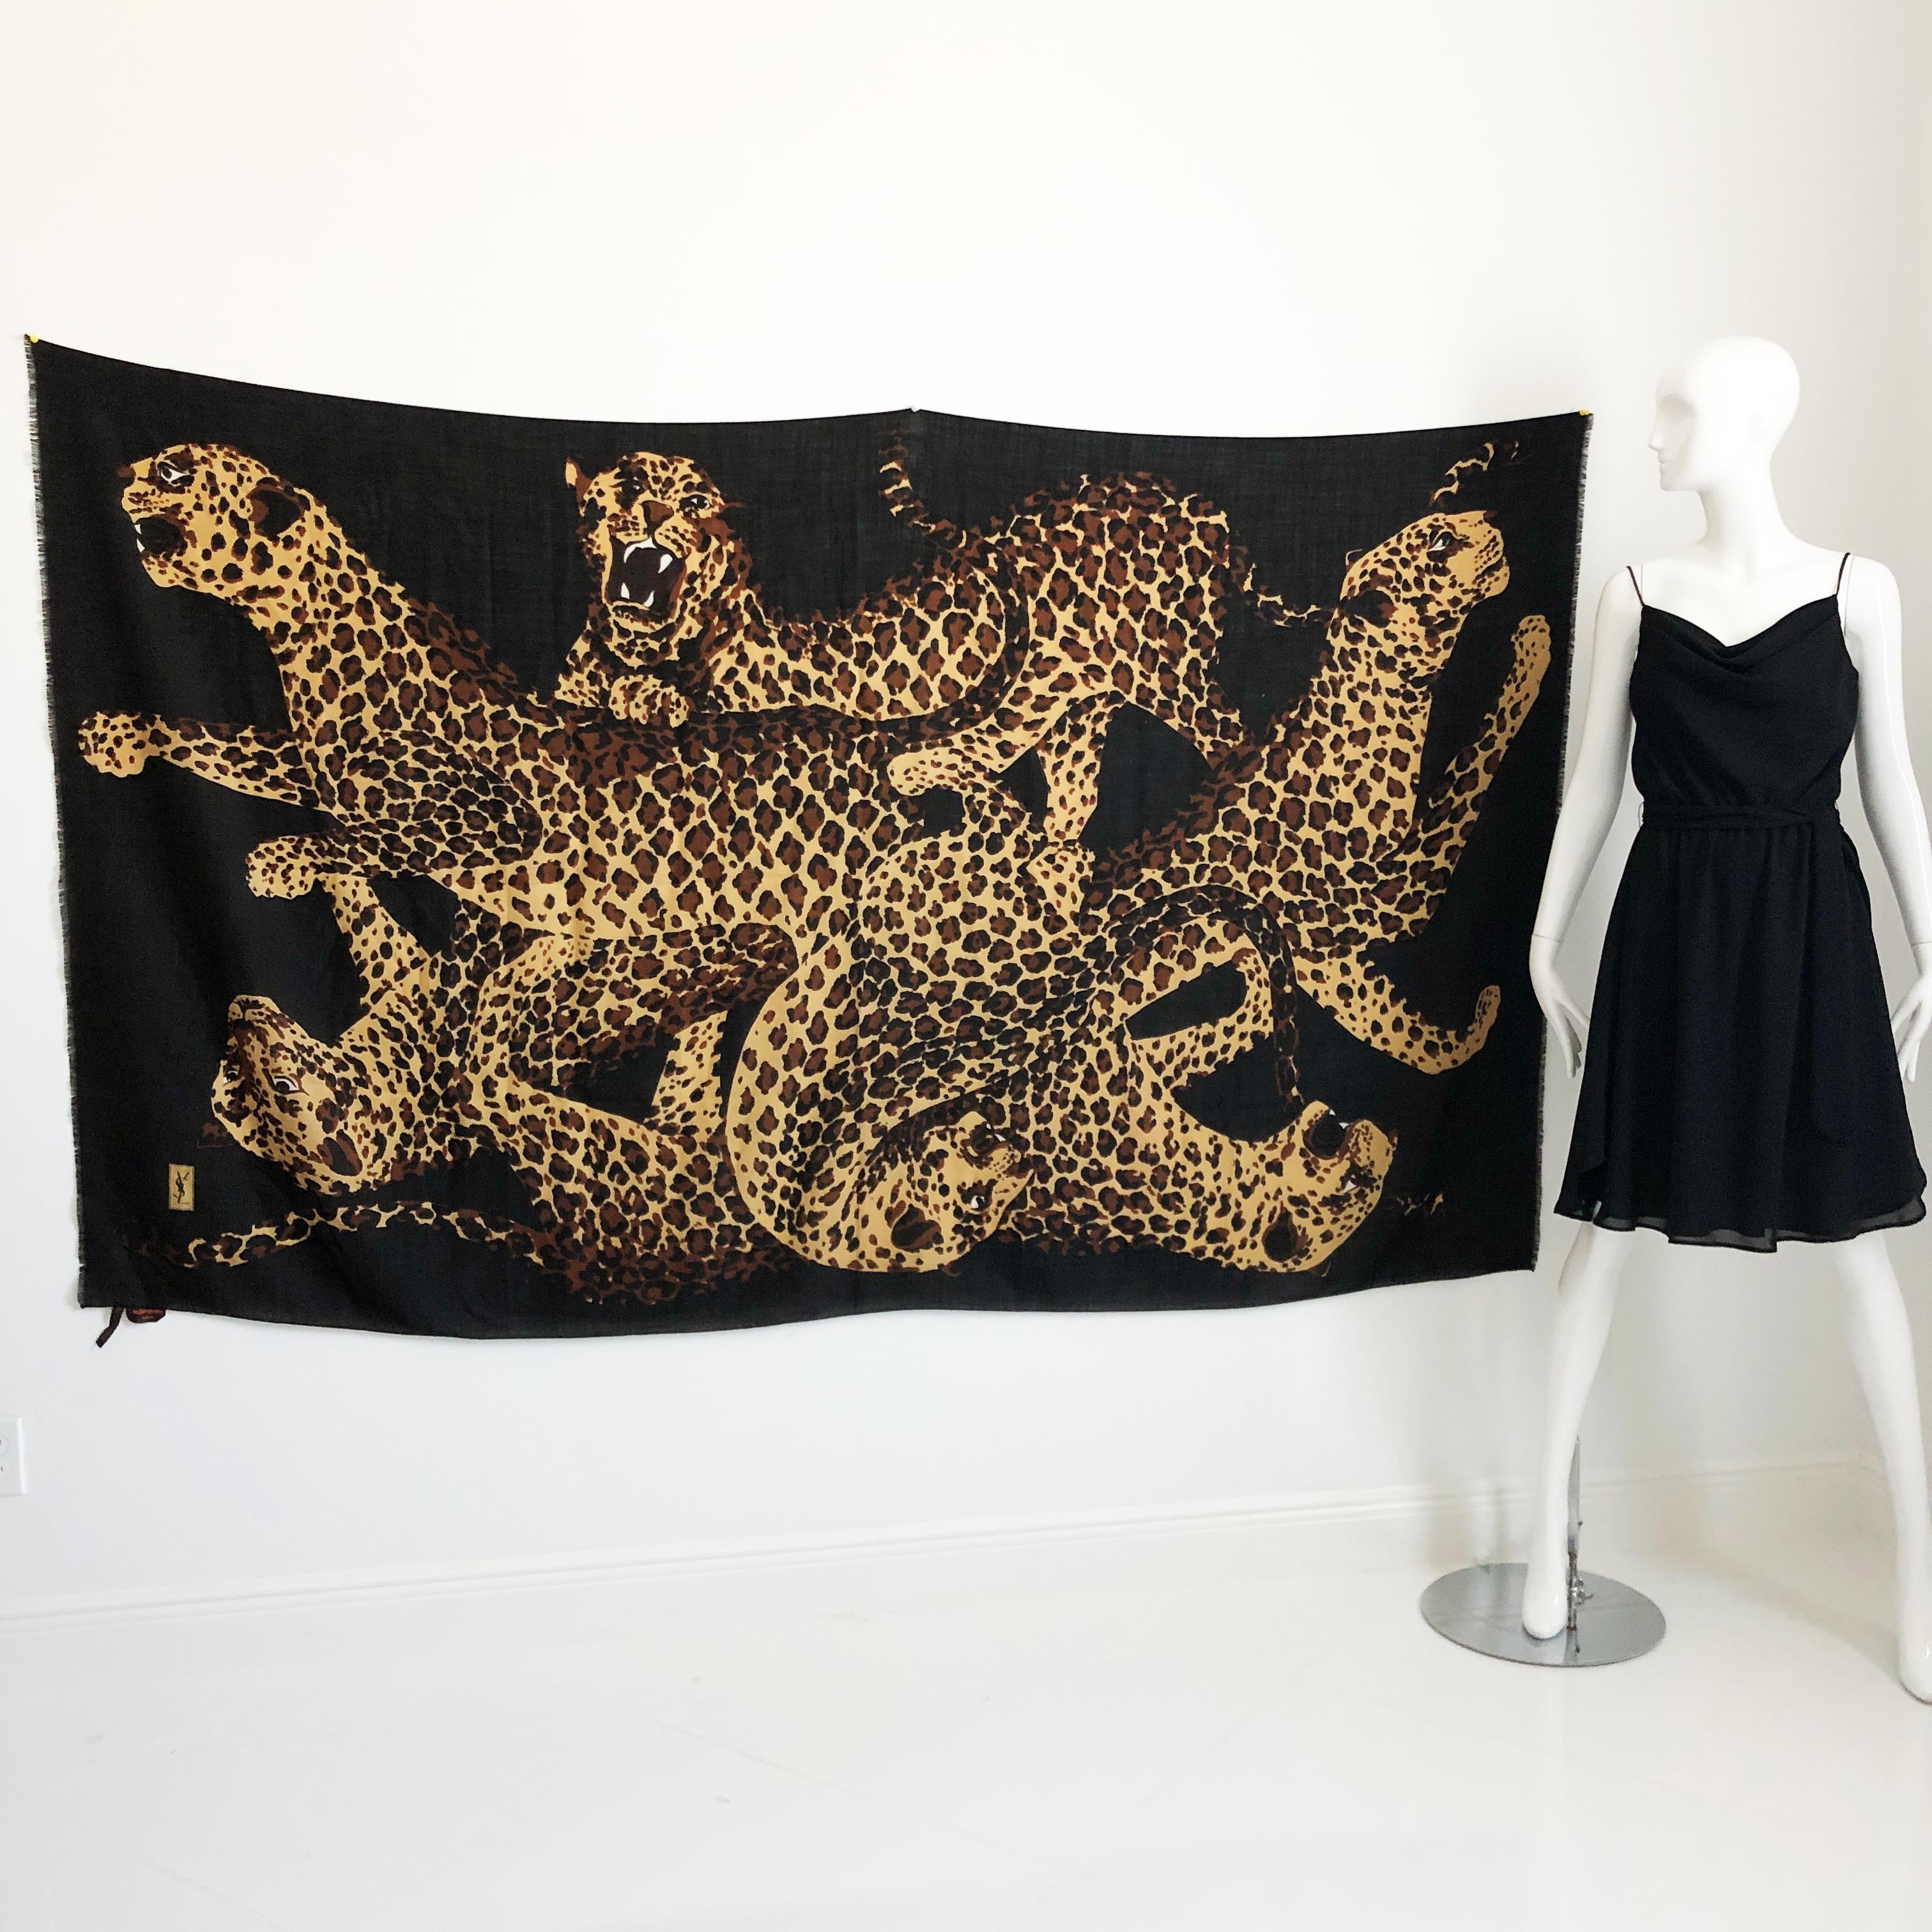 Authentic, preowned and incredibly rare Yves Saint Laurent Massive 84in L x 78in H Leopards shawl or scarf.  Perfect for wear as a pareo or shawl (or even for use as an outstanding wall decoration).  Fringed edges on two sides, with YSL logo on